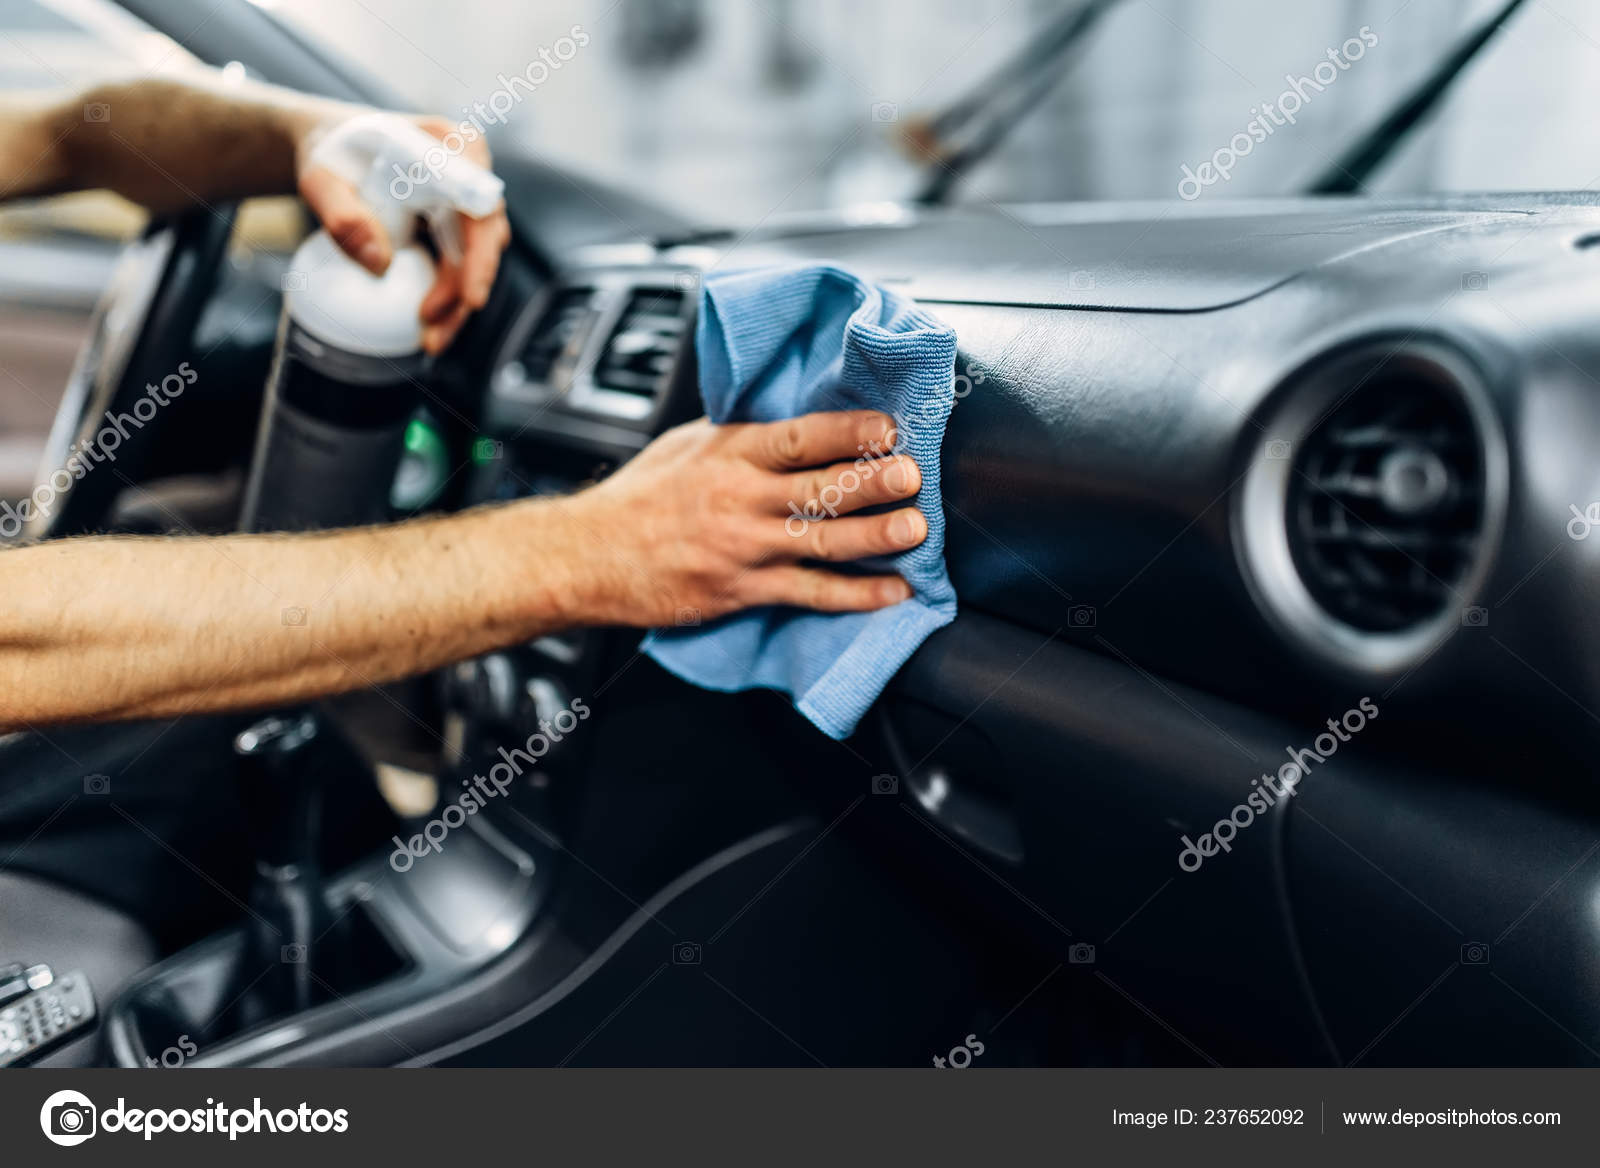 Carwash, Worker Cleans Salon with Steam Cleaner Stock Image